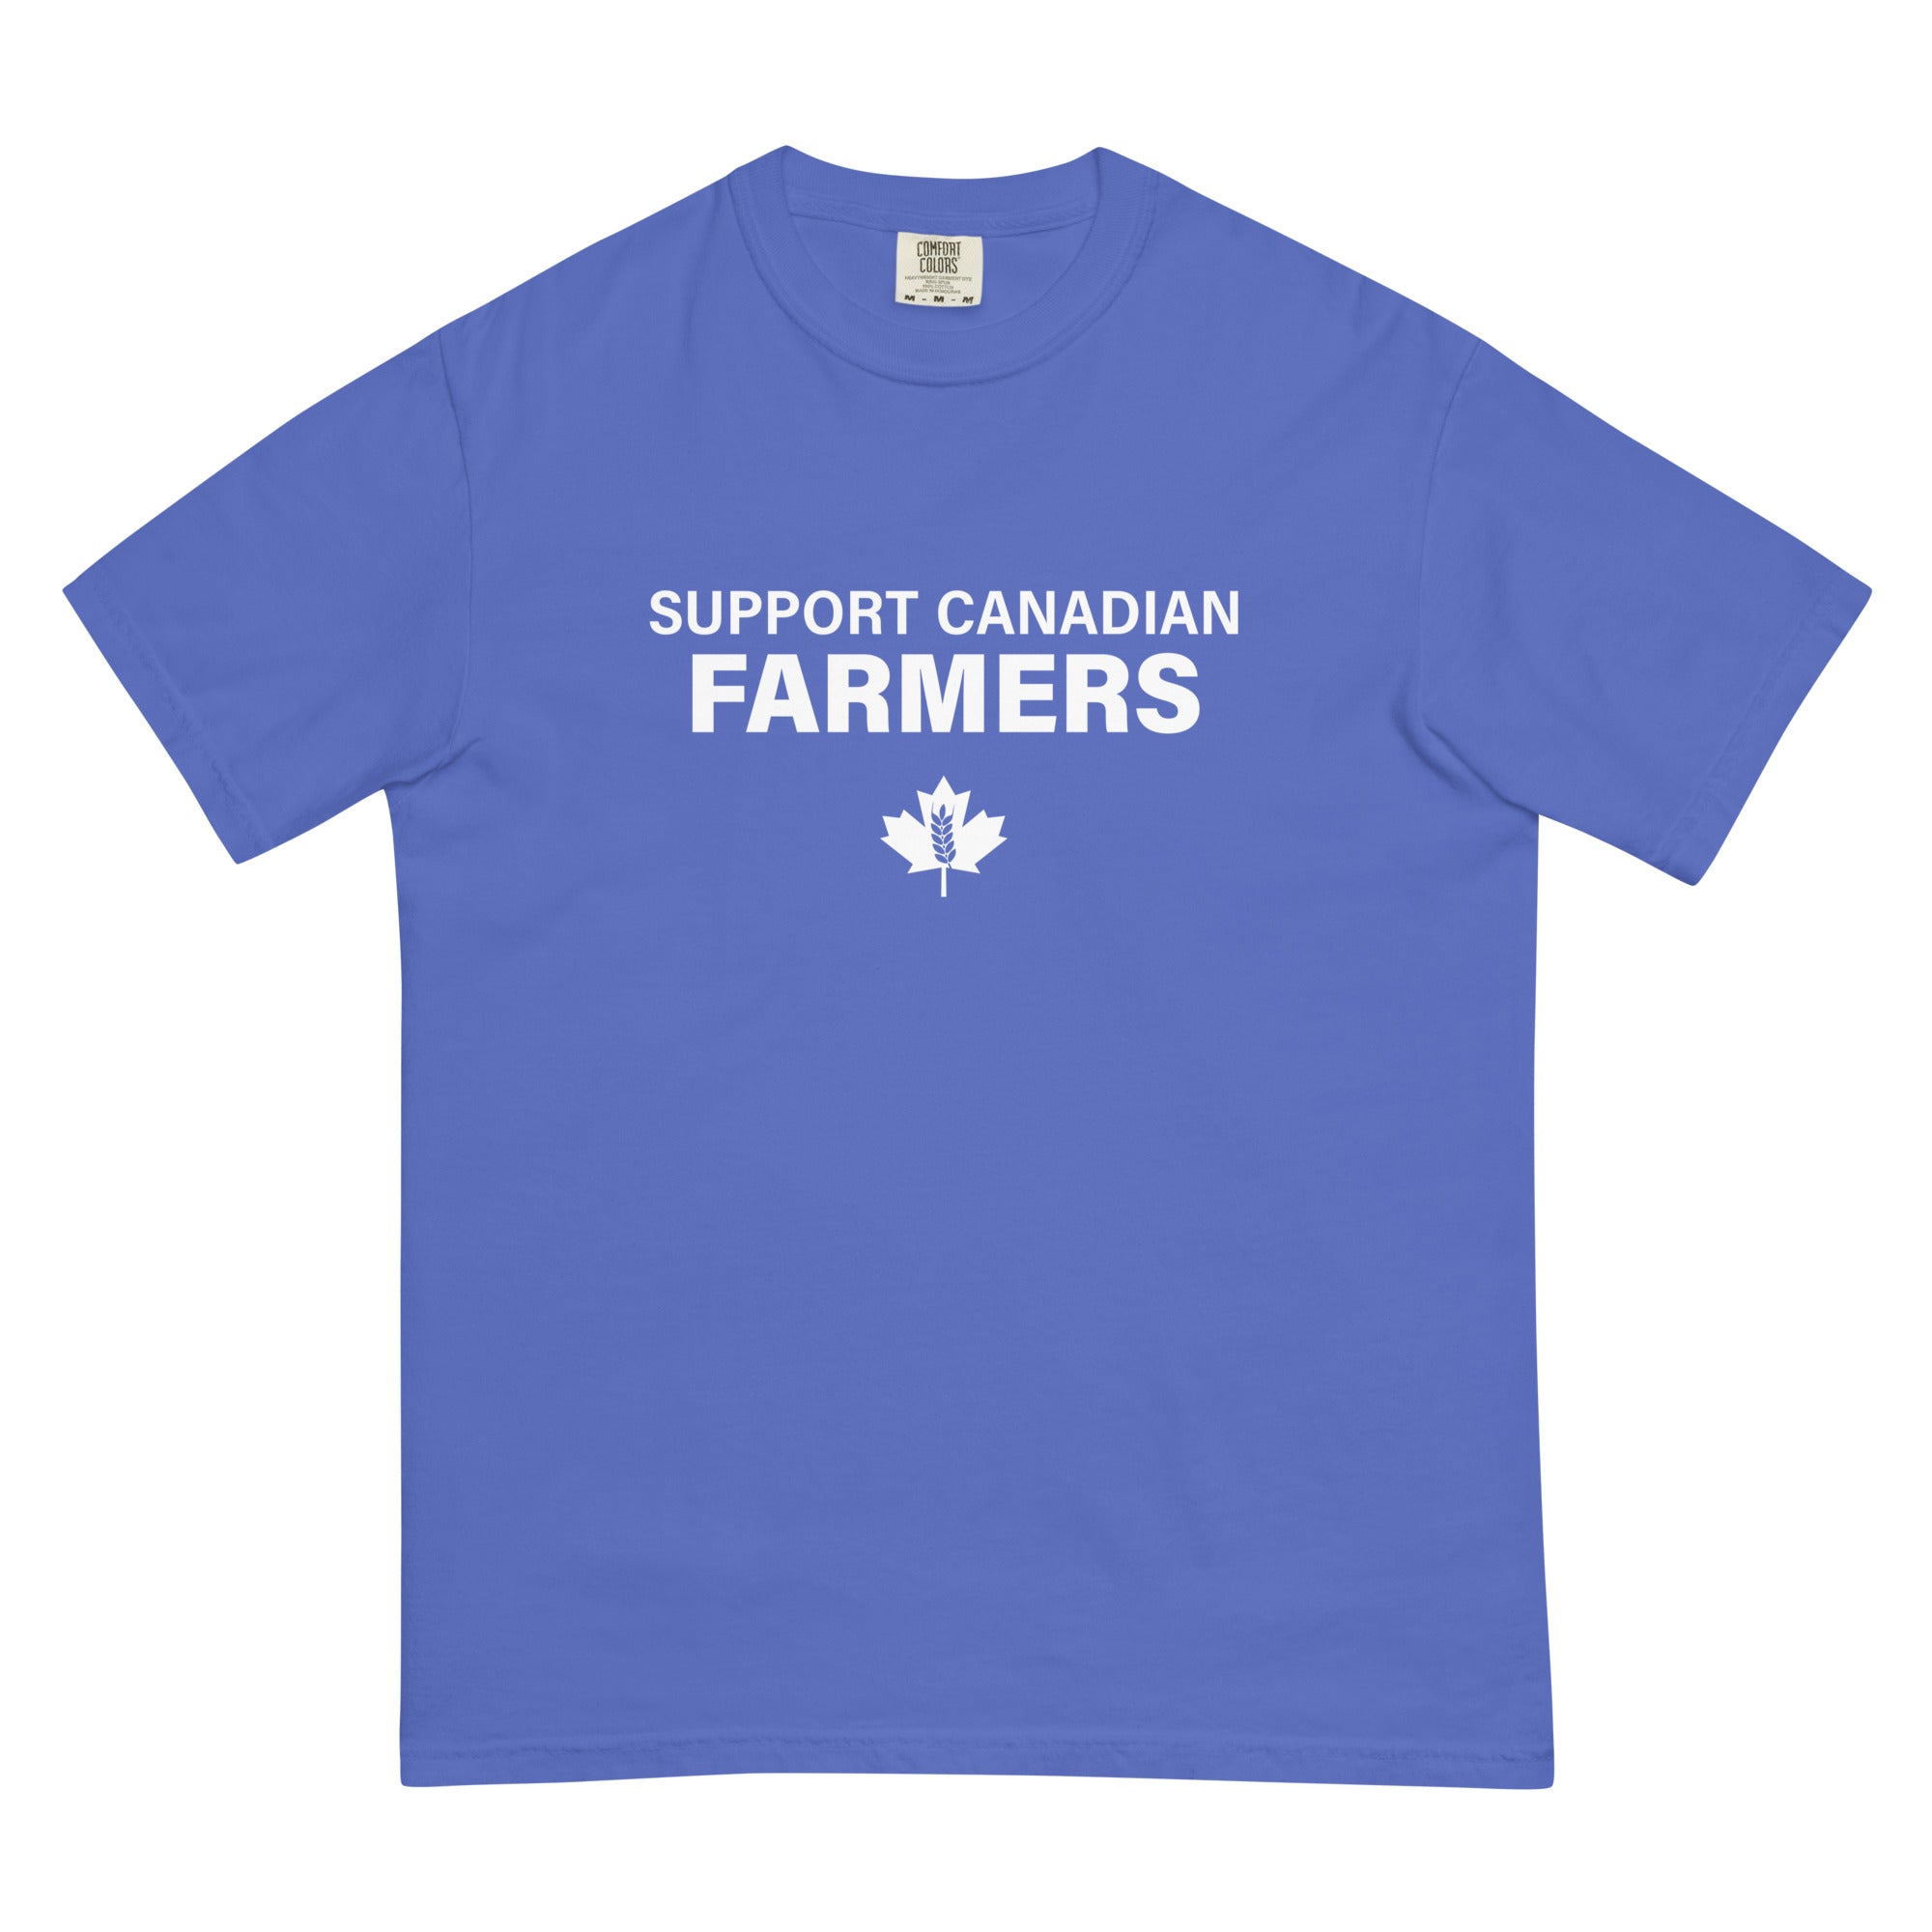 Men's "Support Canadian Farmers" t-shirt